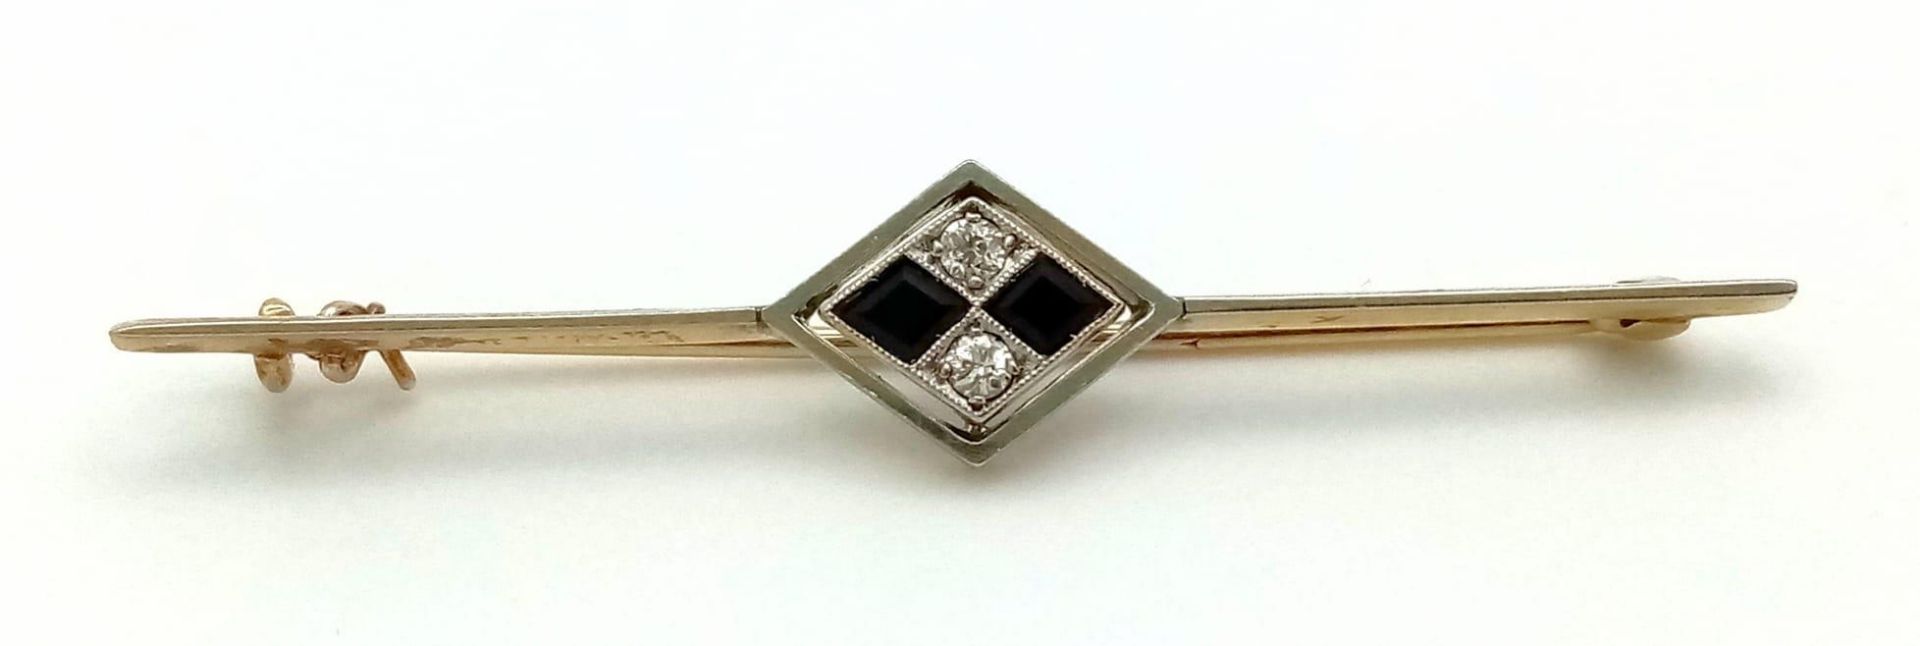 An Art Deco Diamond and Onyx Brooch in 18K Gold and Platinum. 5.5cm. 3.75g total weight. - Image 2 of 4